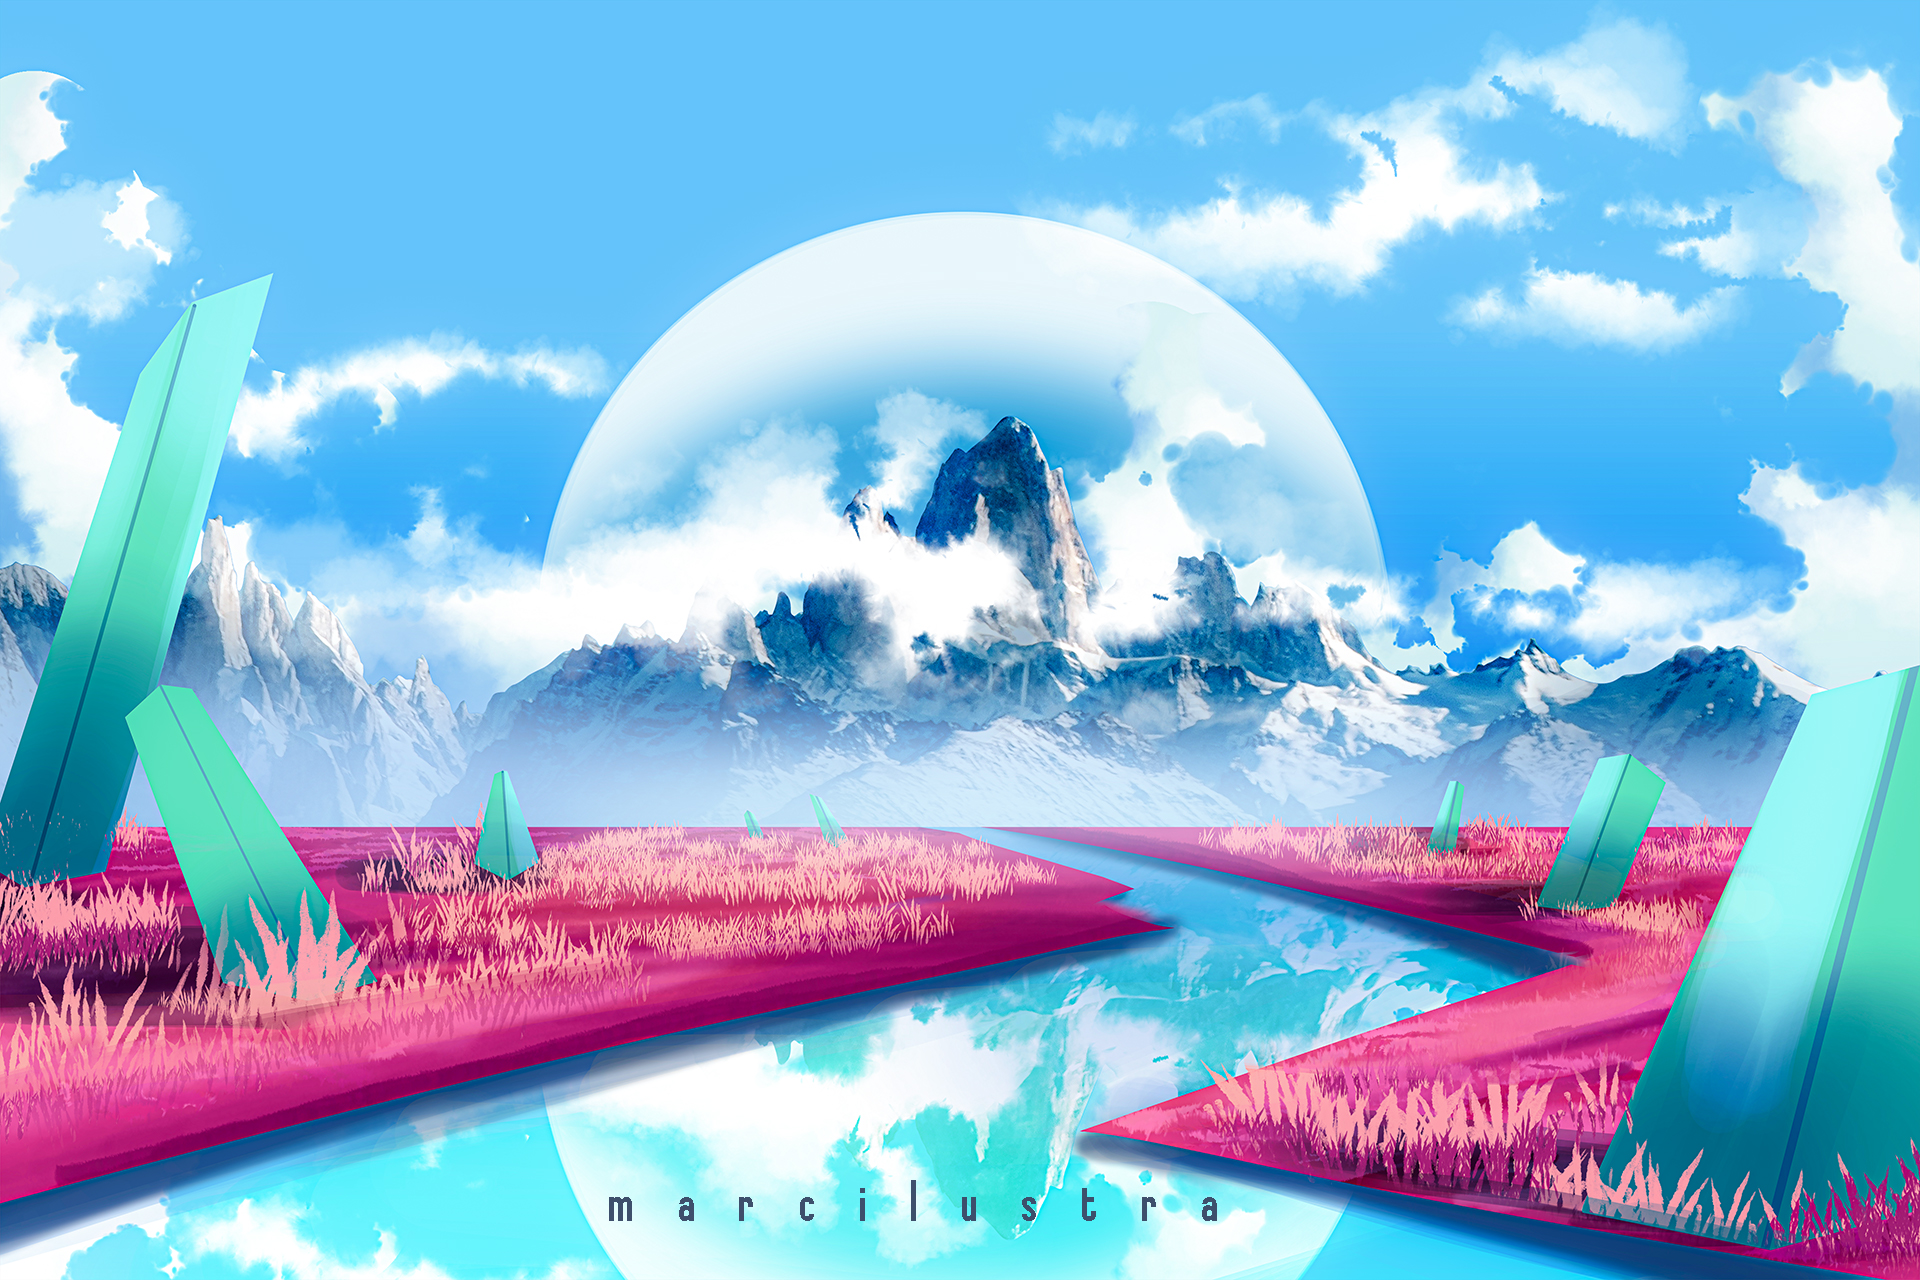 General 1920x1280 Moon grass crystal  river mountains science fiction clouds mist No Man's Sky digital art watermarked